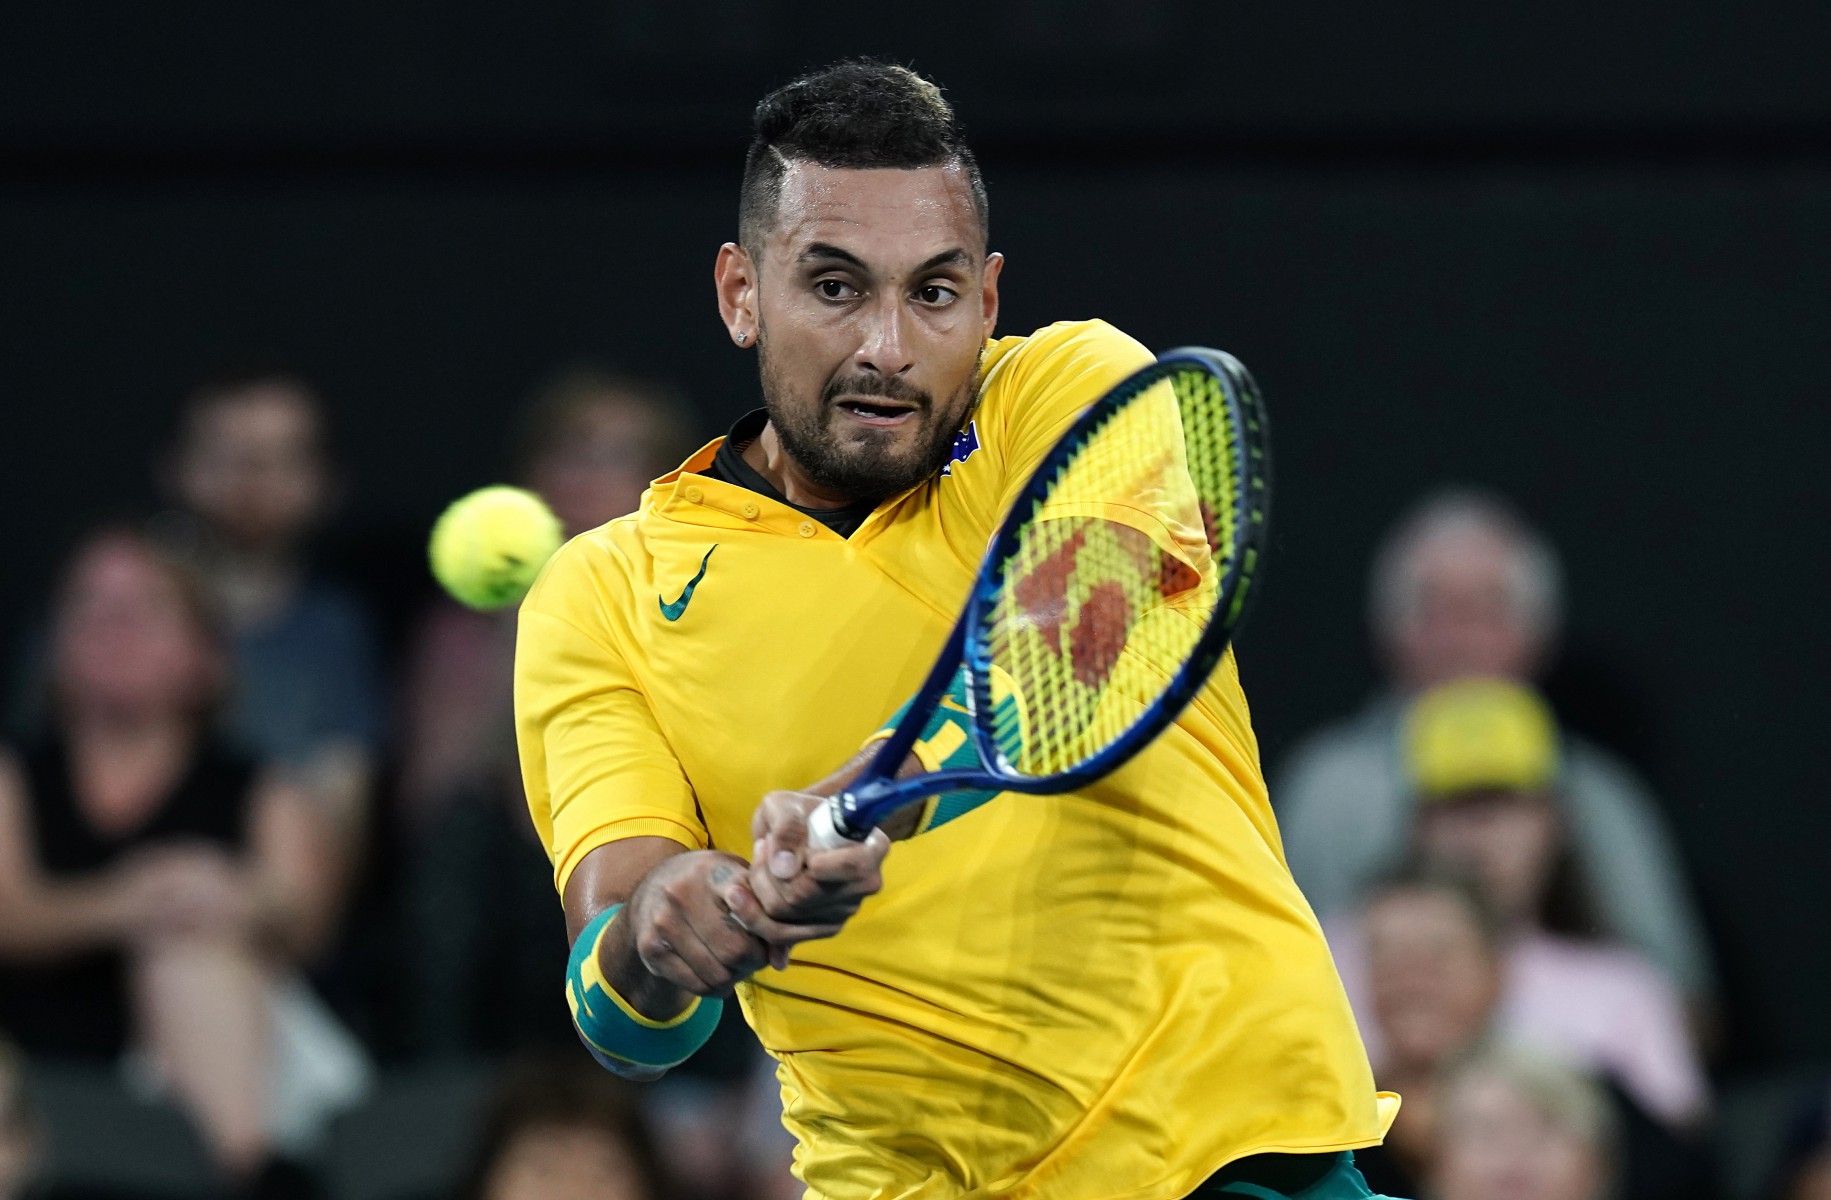 Kyrgios prevailed 7-6 6-7 7-6 in a brilliant match of tennis to complete the tie victory for Team Australia